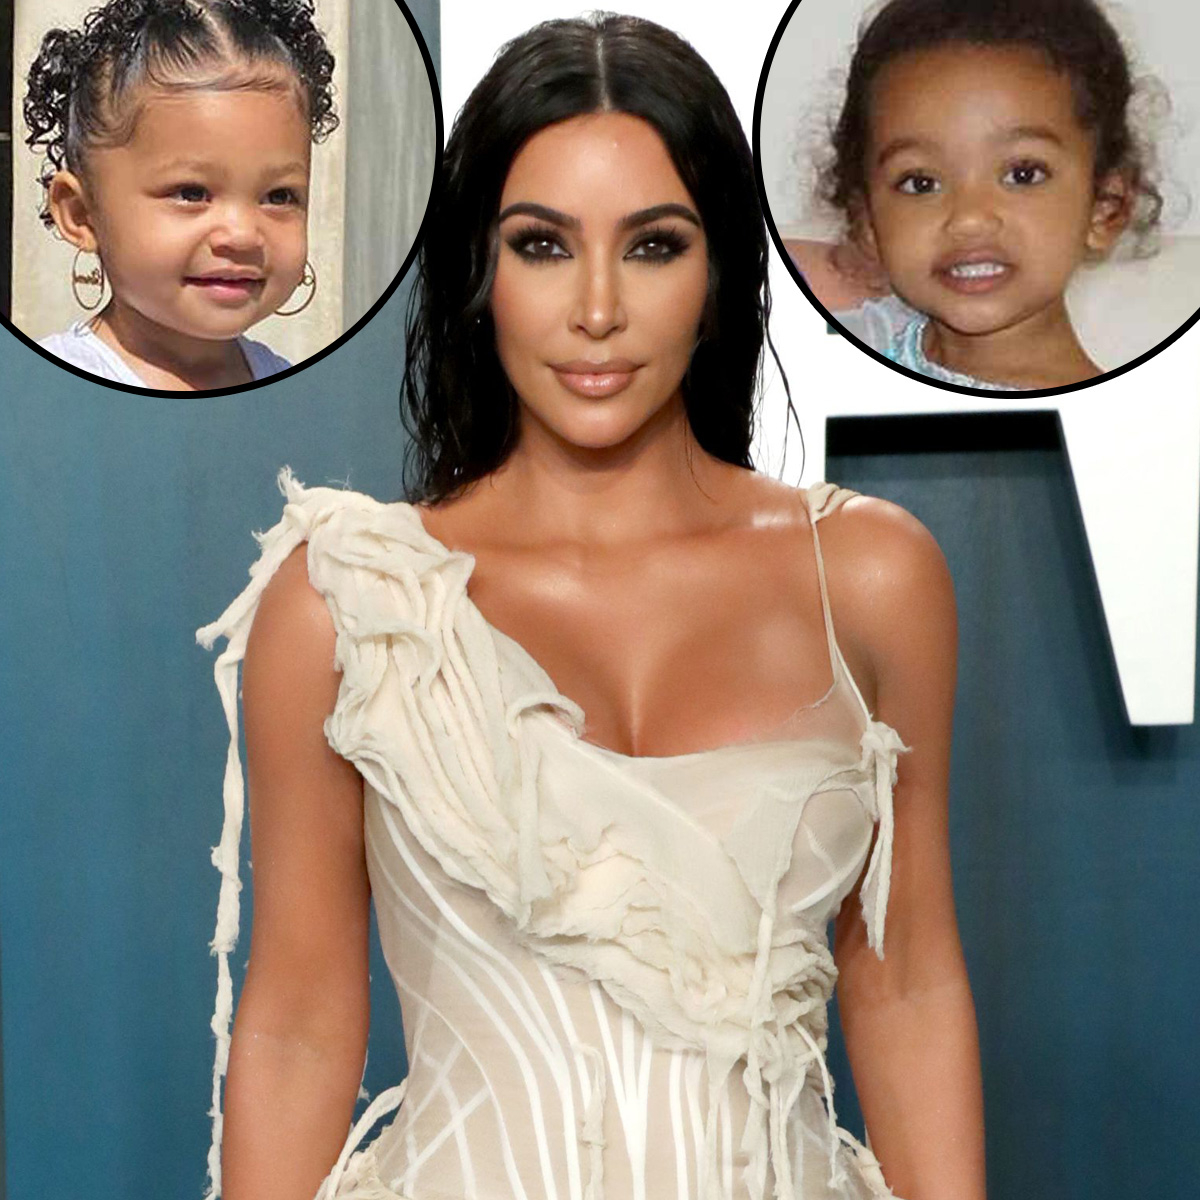 TBT photo of Kim Kardashian from West Chicago and Stormi Webster is very cute